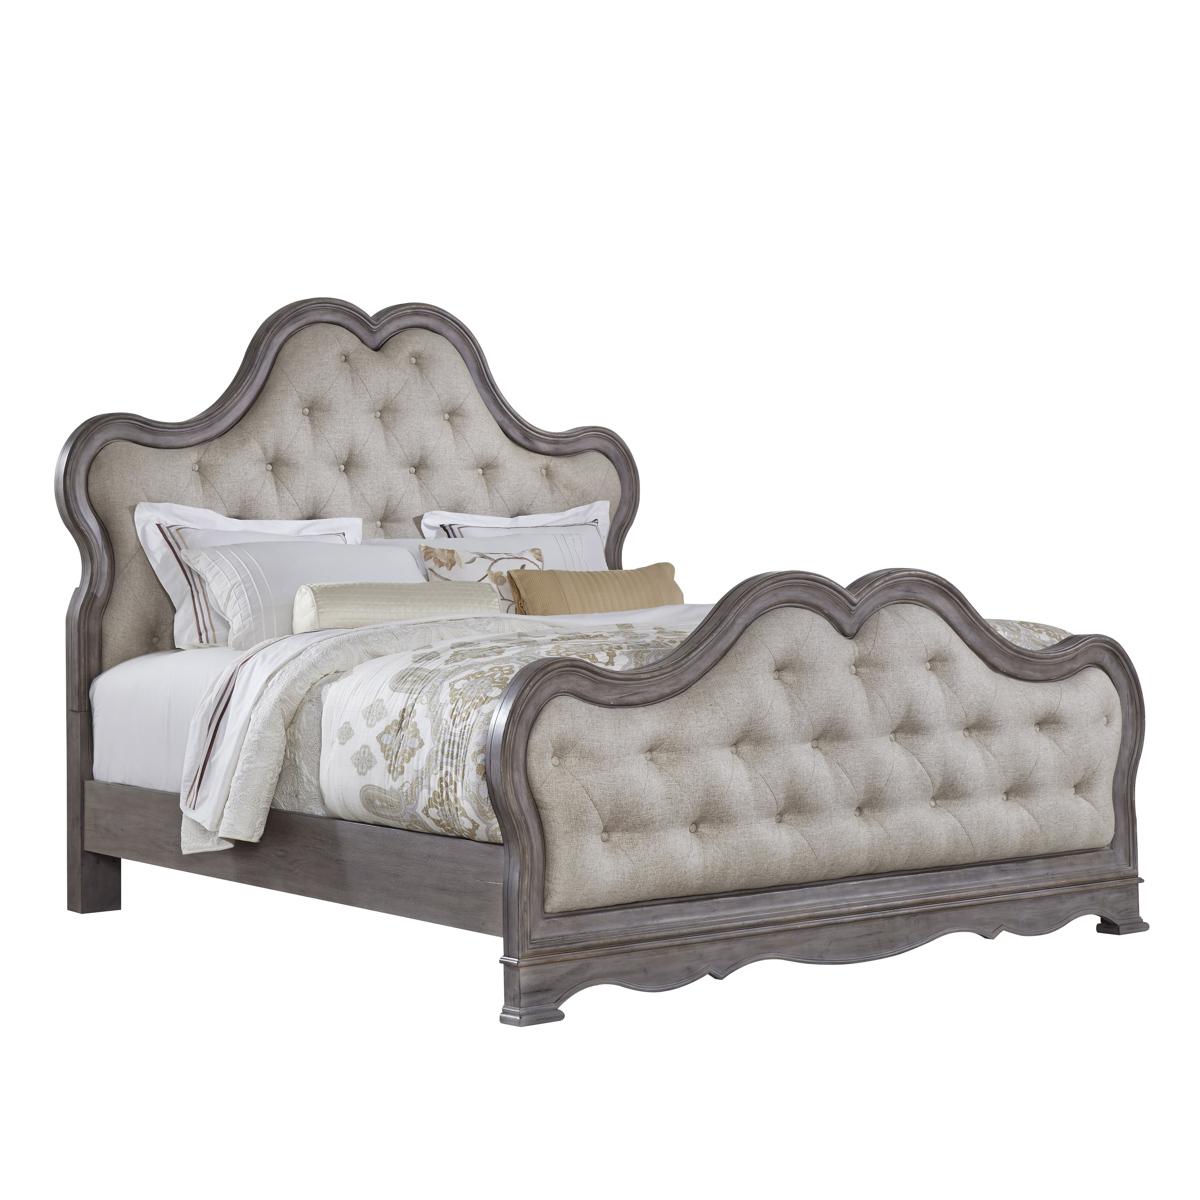 Pulaski Simply Charming Queen Tufted Upholstered Bed in Light Wood